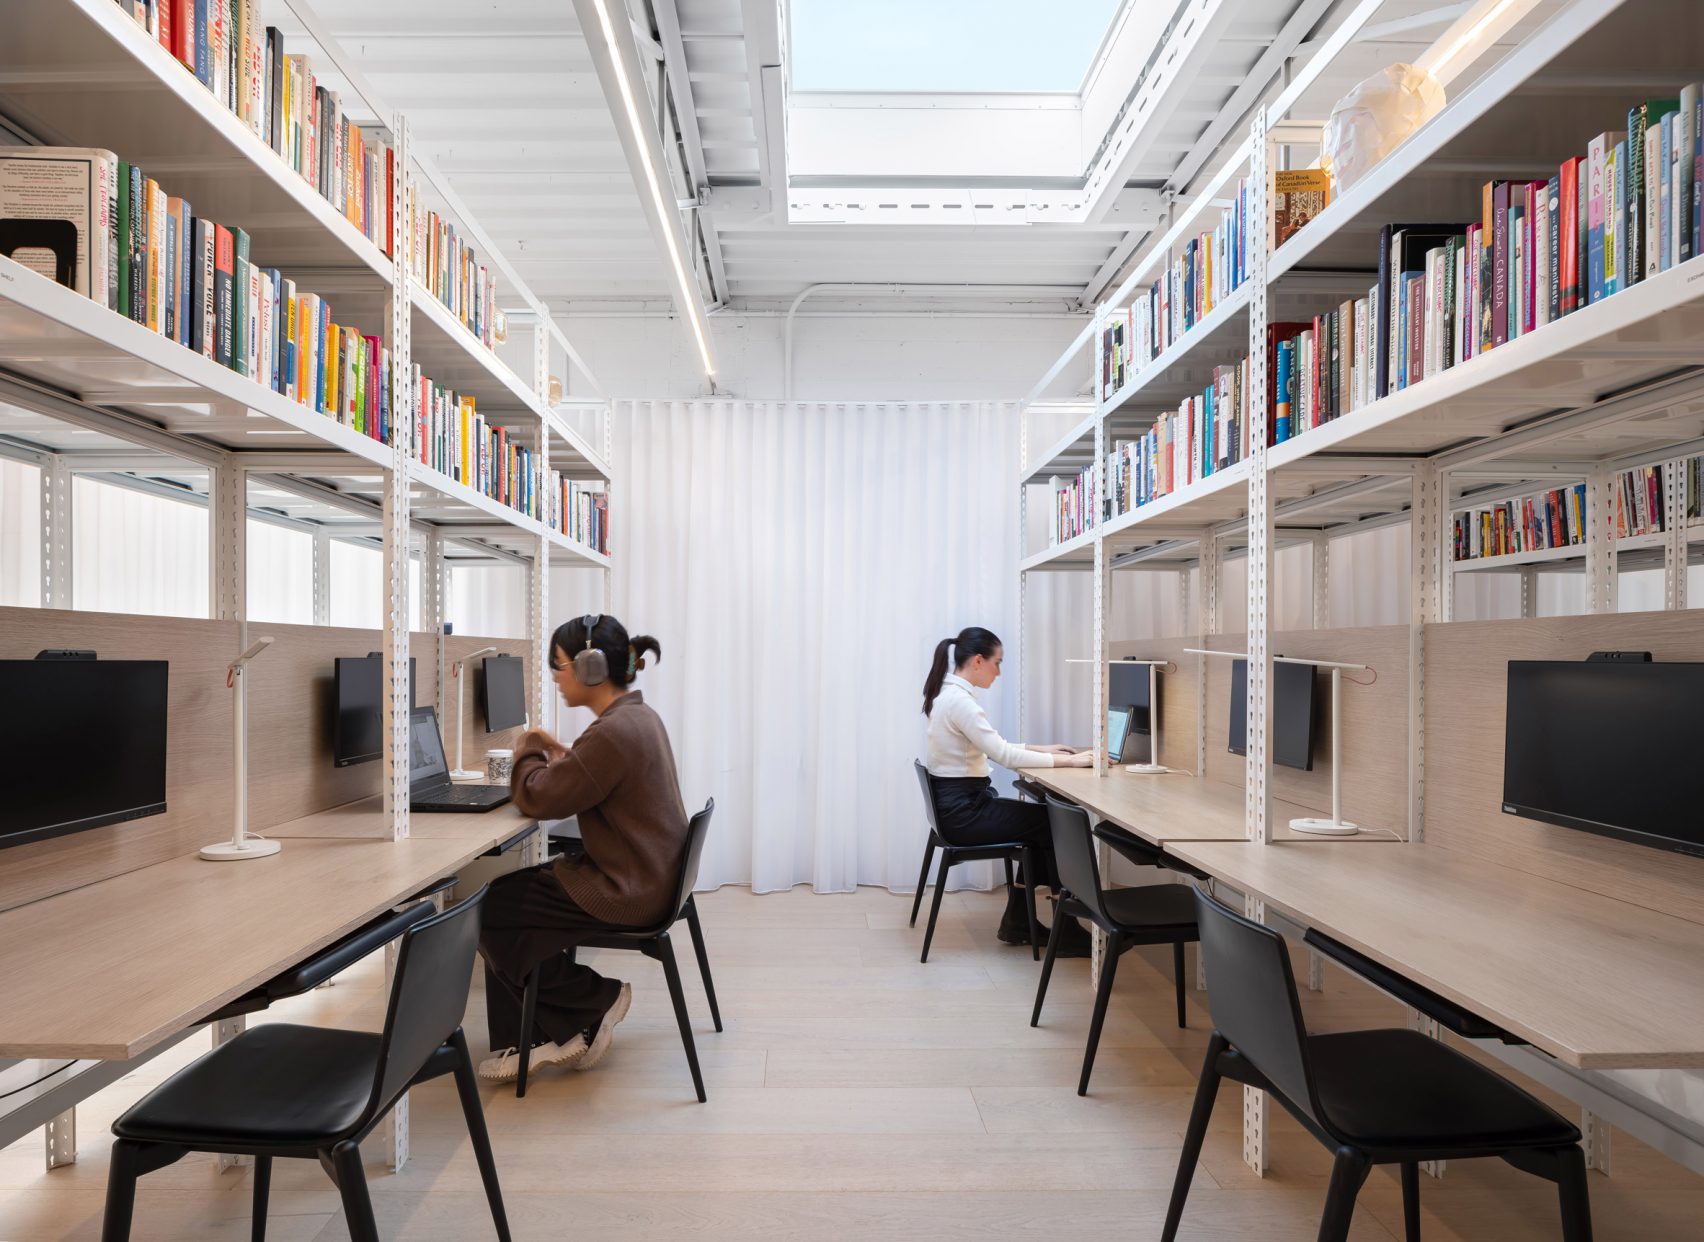 Mason Studio's Library and workspace